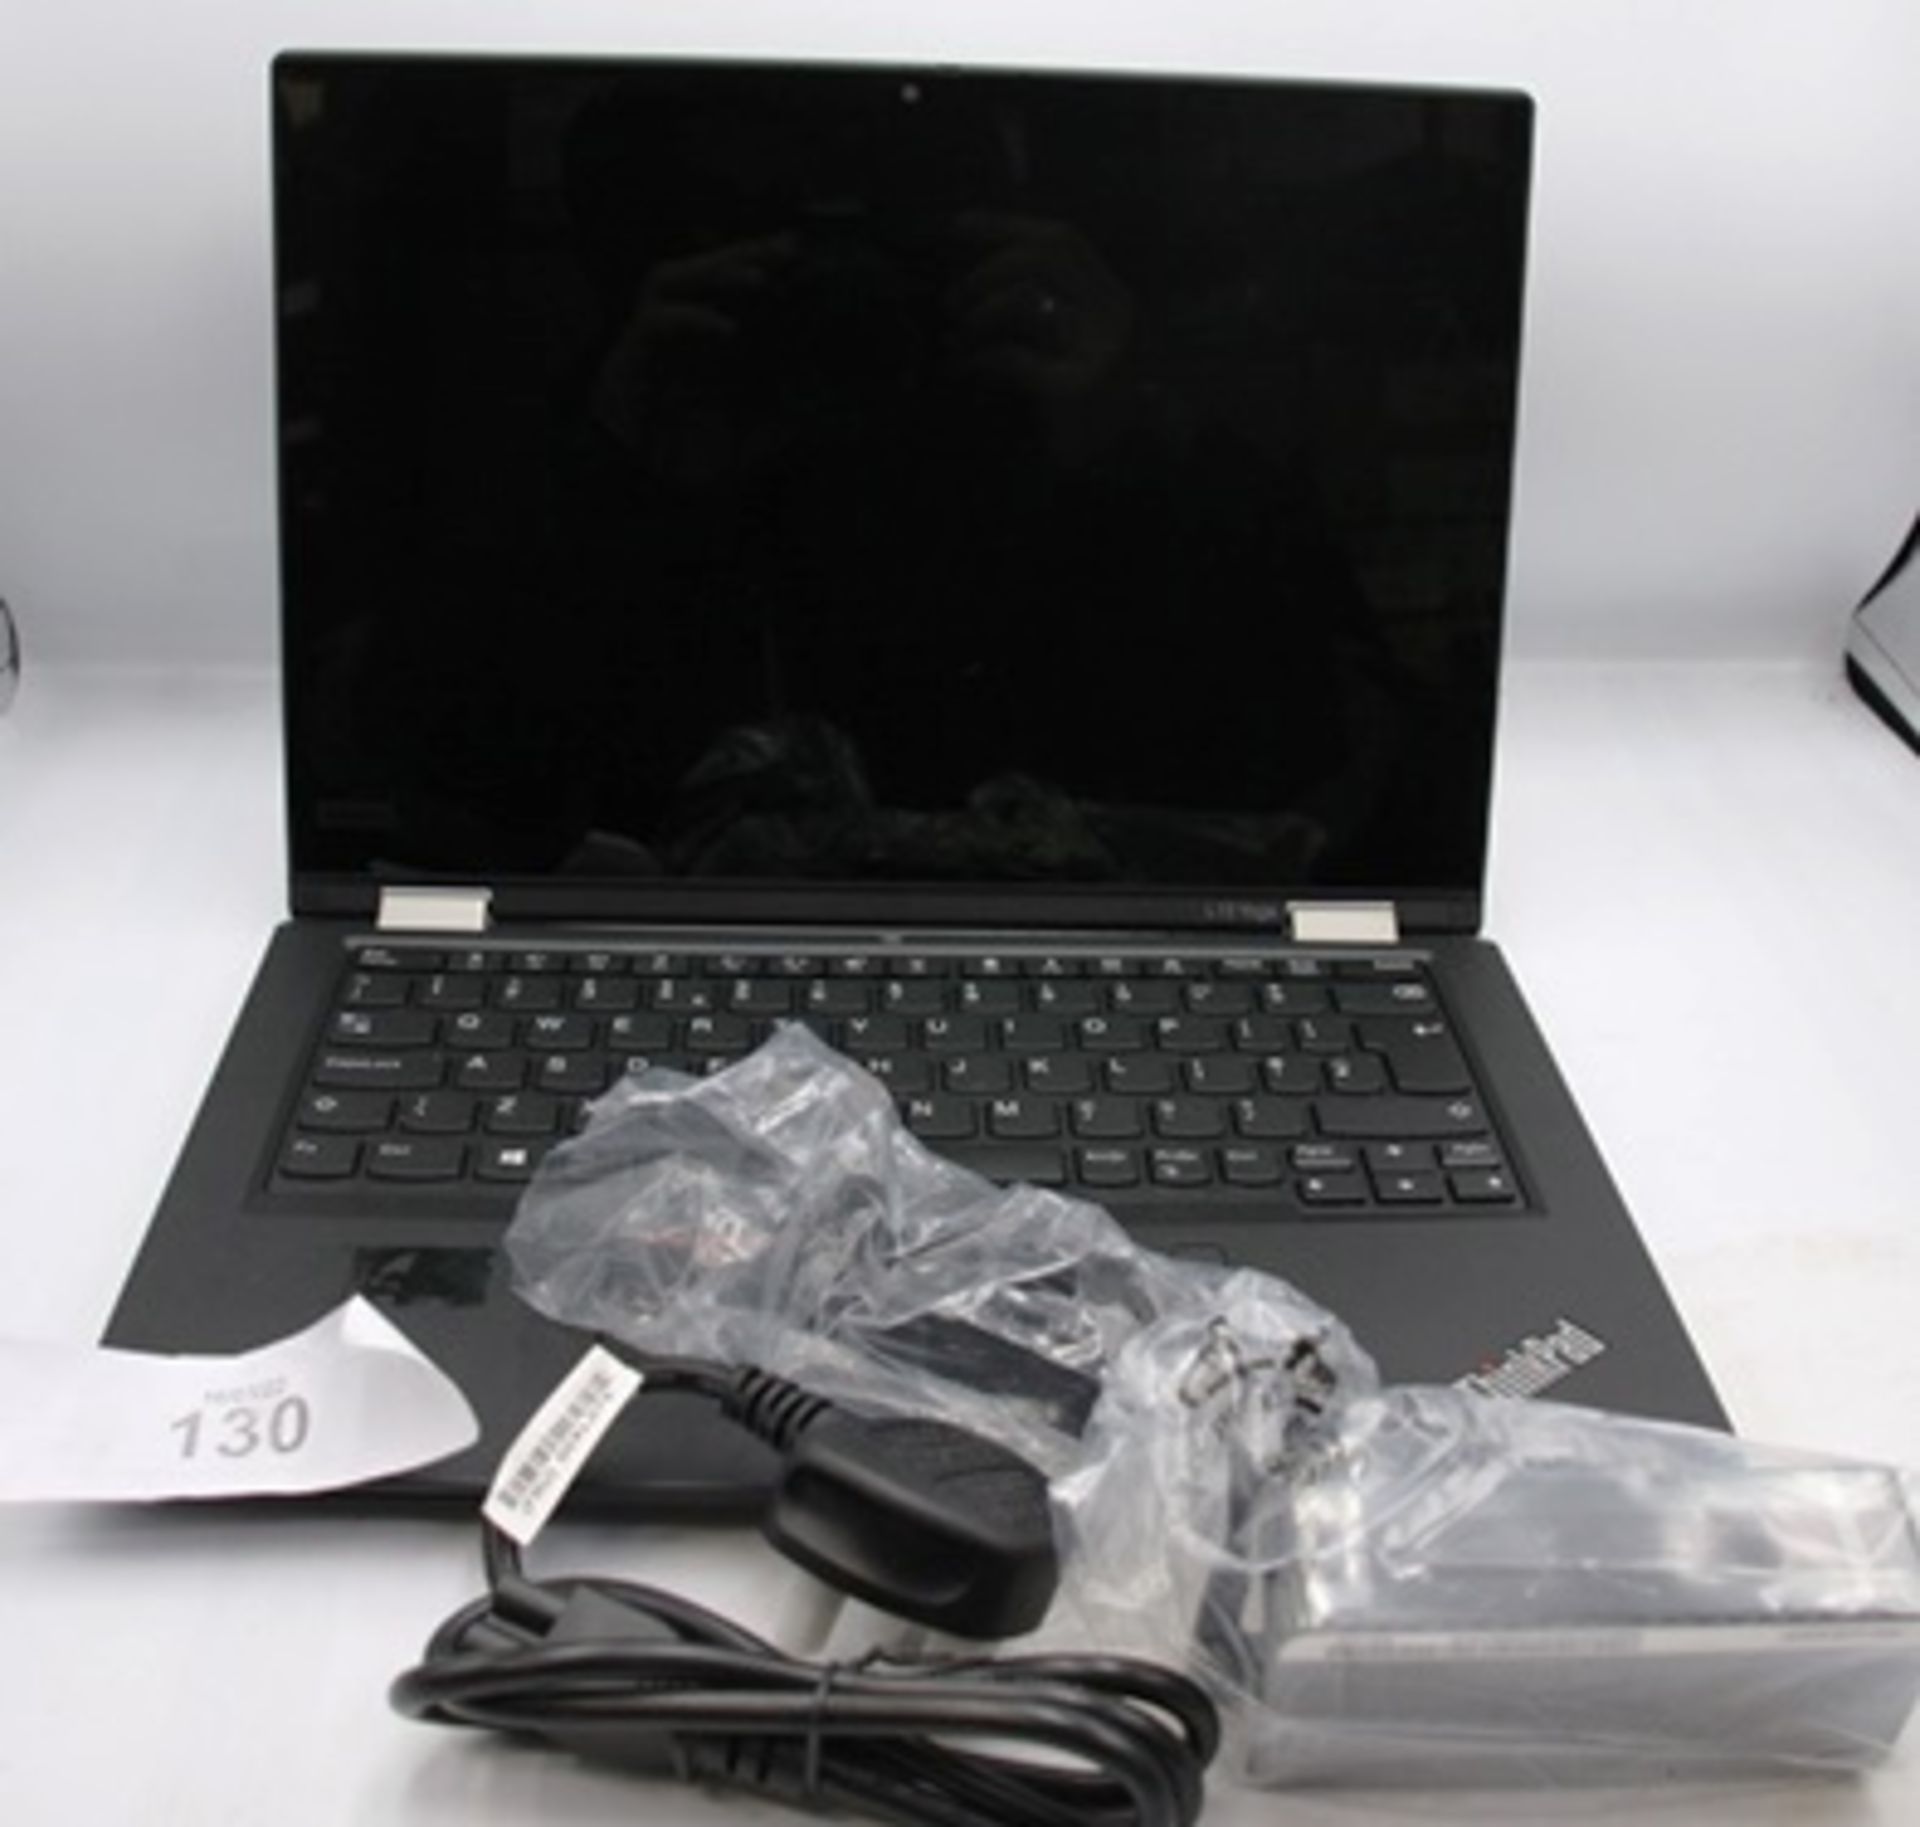 1 x Lenovo L13 Yoga laptop. Intel Core i5 processor, with power supply and box, hard drive removed -